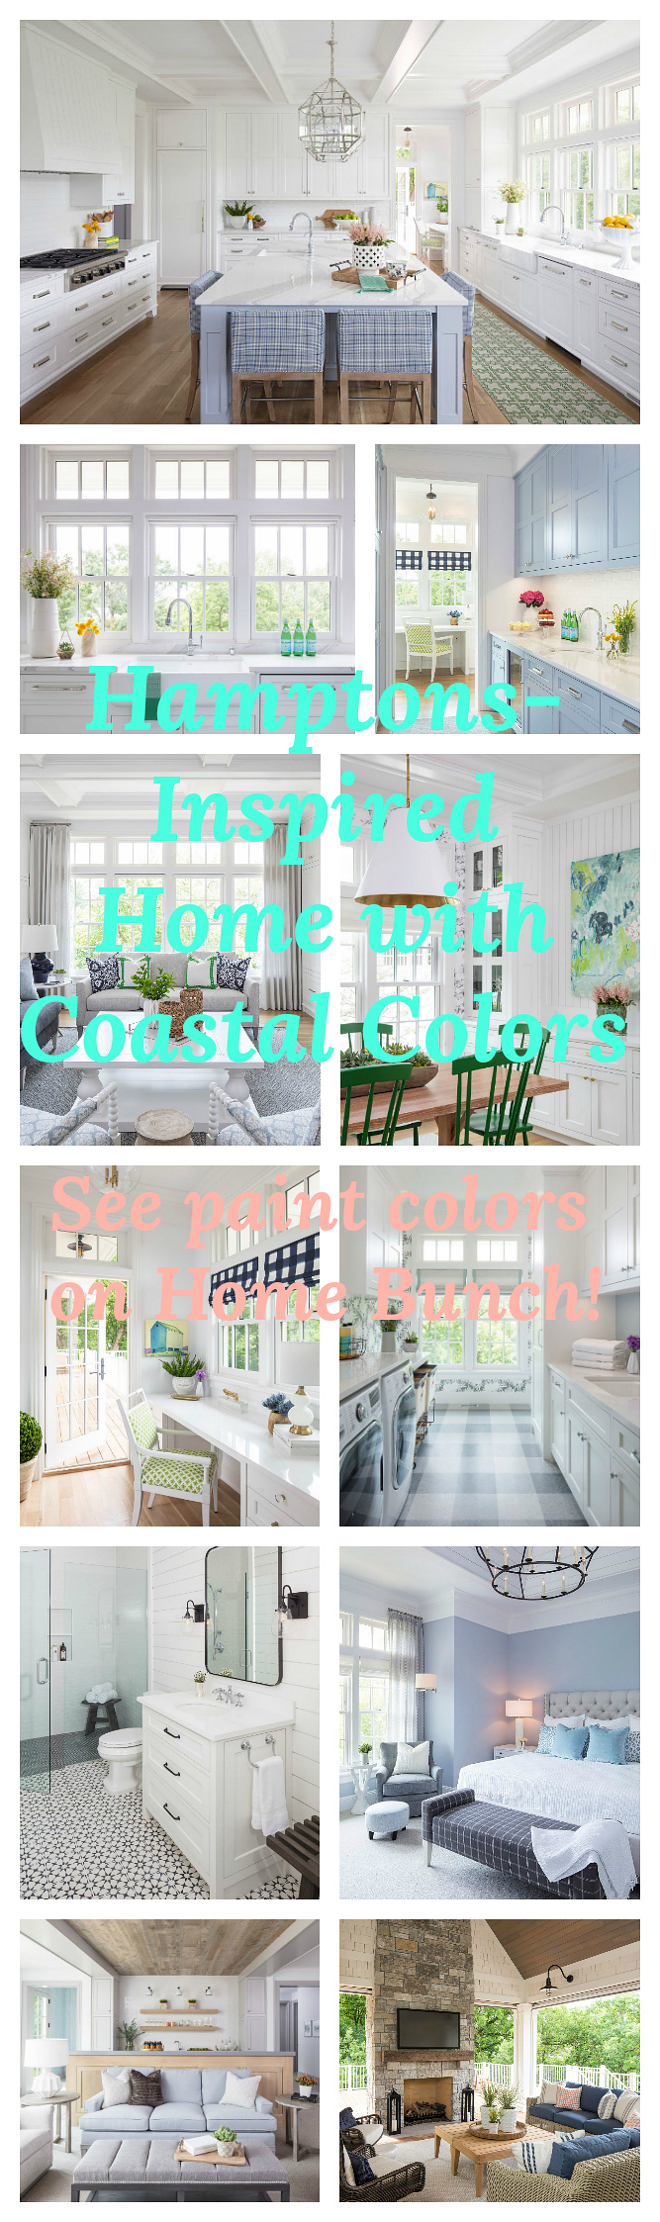 Hamptons-Inspired Home with Coastal Colors. See decor, lighting, furniture and paint color sources on Home Bunch. Hamptons-Inspired Home with Coastal Colors. Hamptons-Inspired Home with Coastal Colors. #HamptonsInspiredHome #CoastalColors Home Bunch